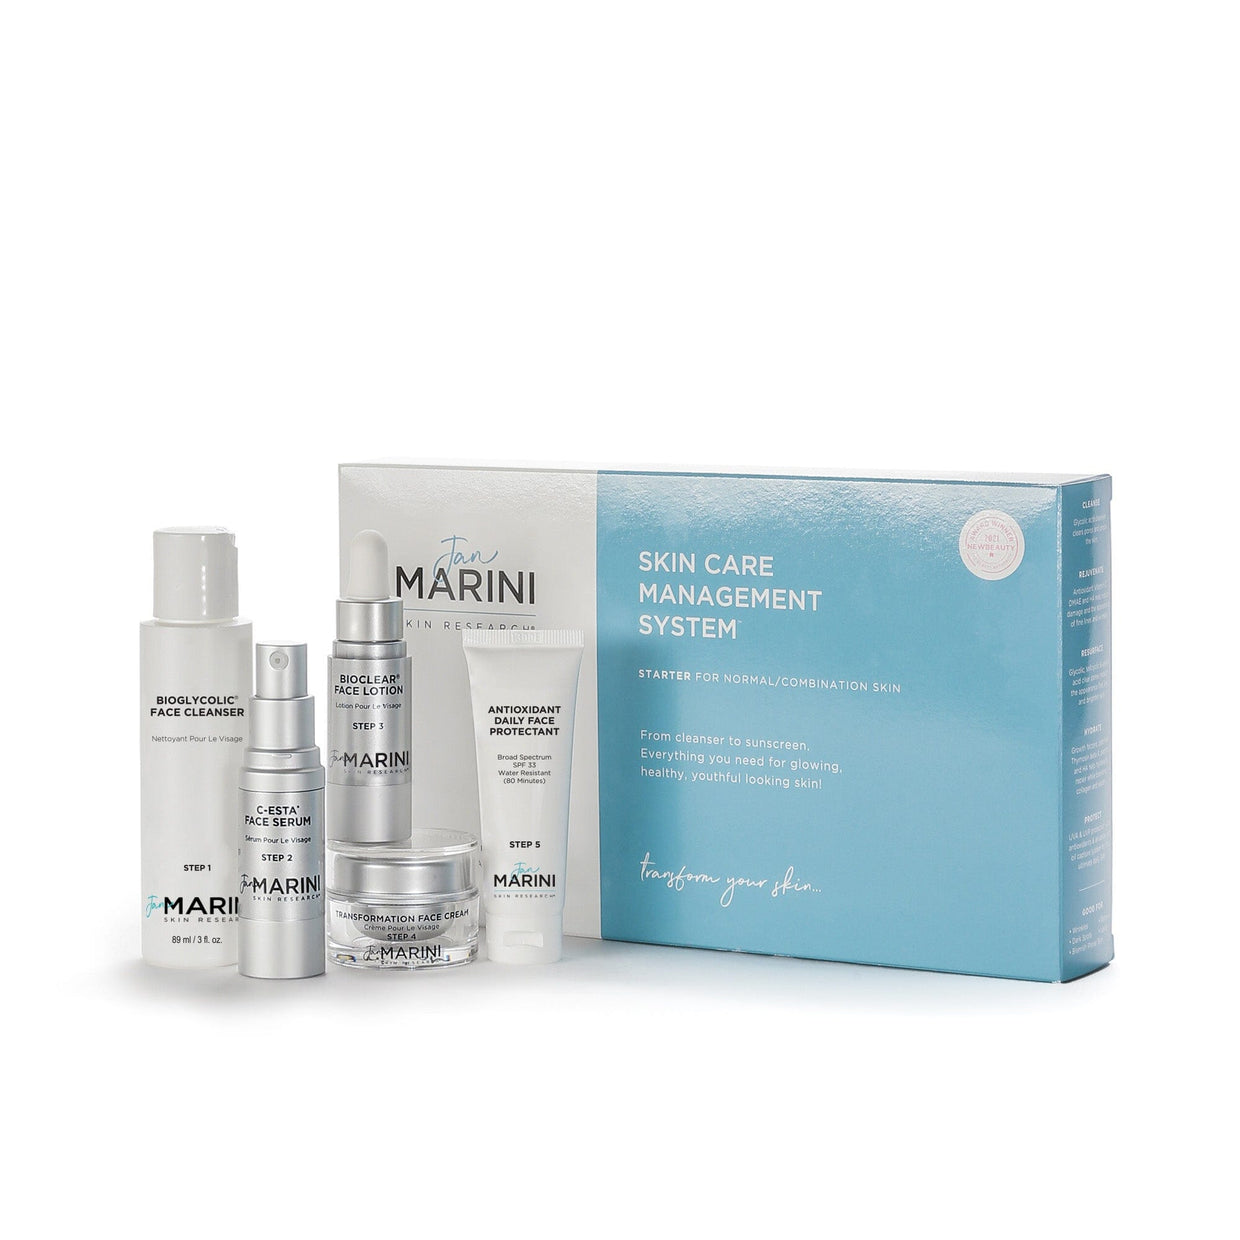 Jan Marini Starter Skincare Management System-Normal/Combination with Antioxidant Daily Face Protectant SPF 33 Anti-Aging Skin Care Kits Jan Marini Shop at Exclusive Beauty Club